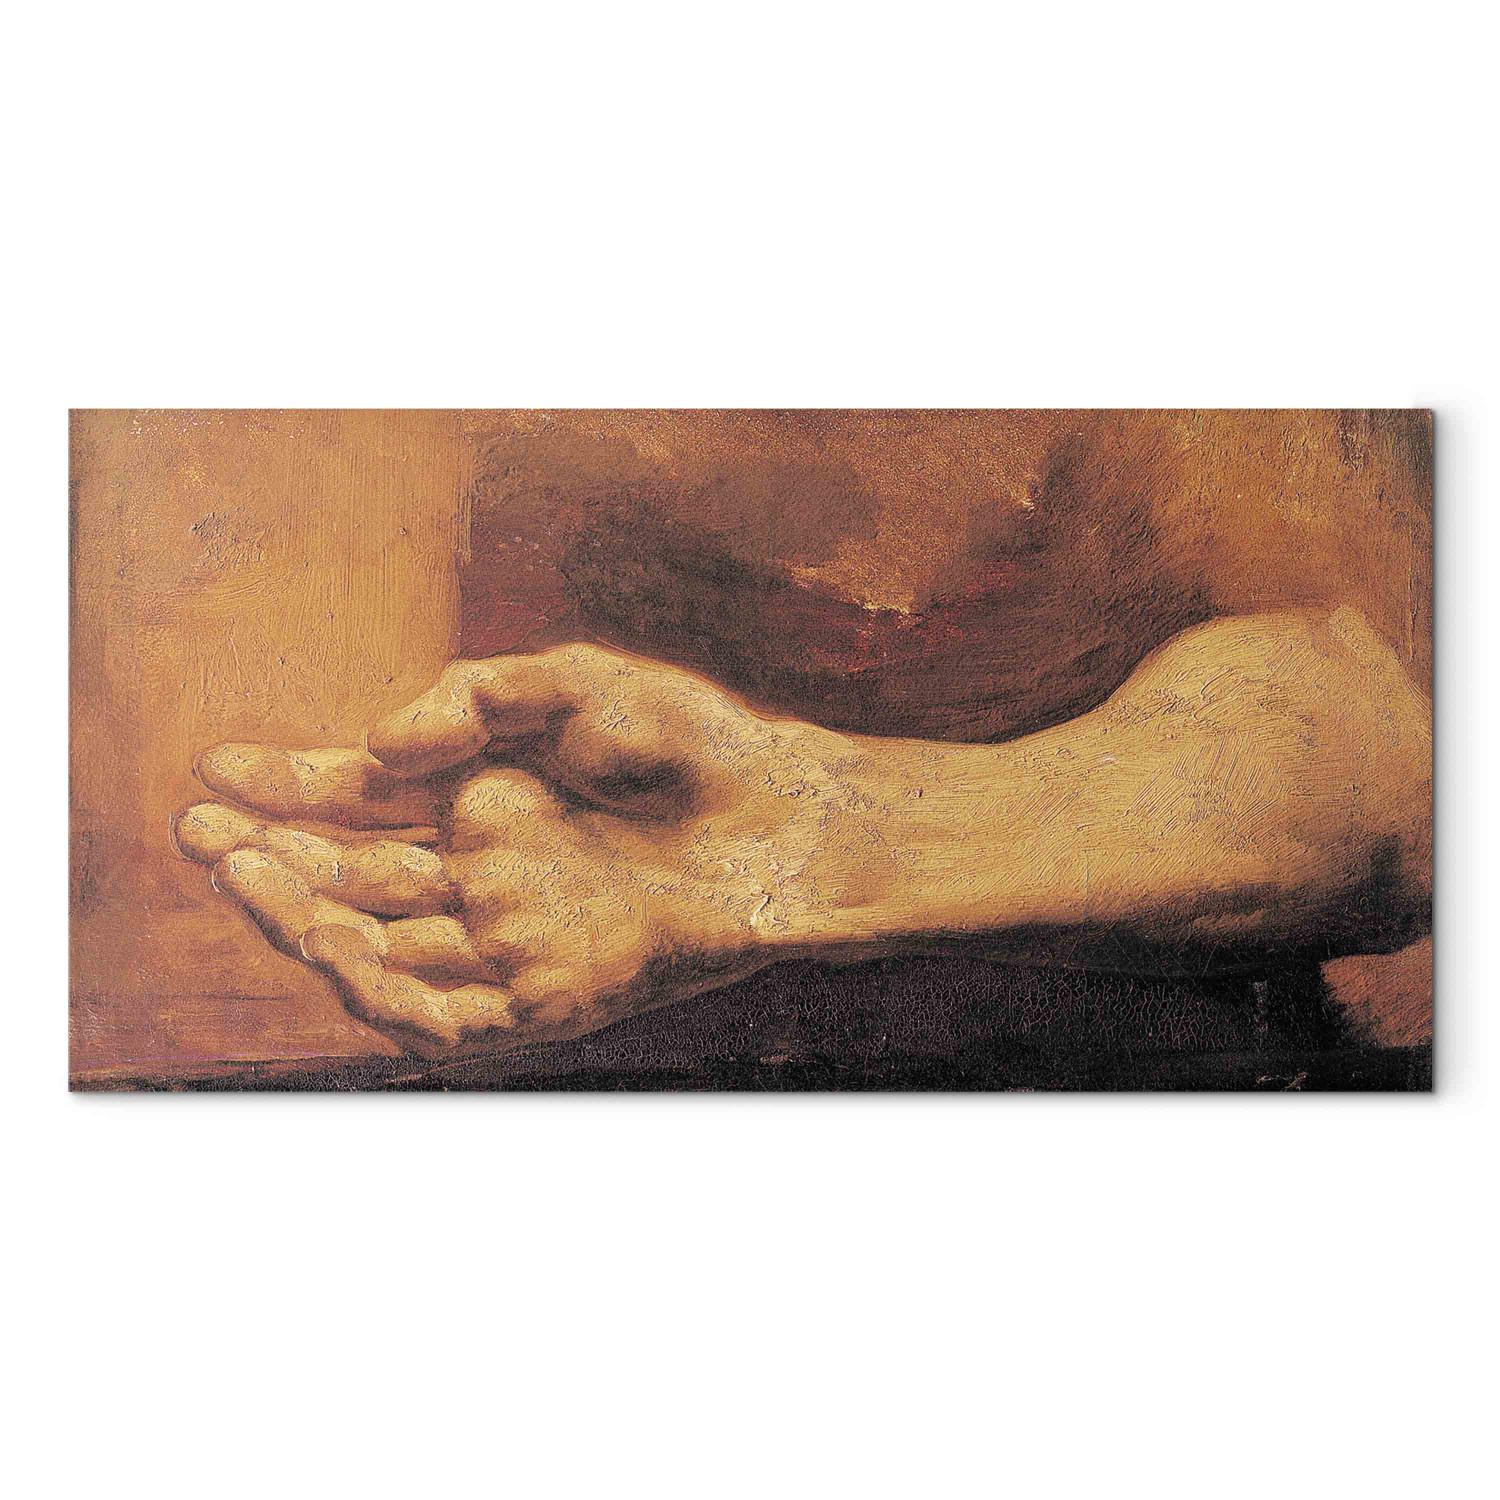 Canvas Study of a Hand and Arm